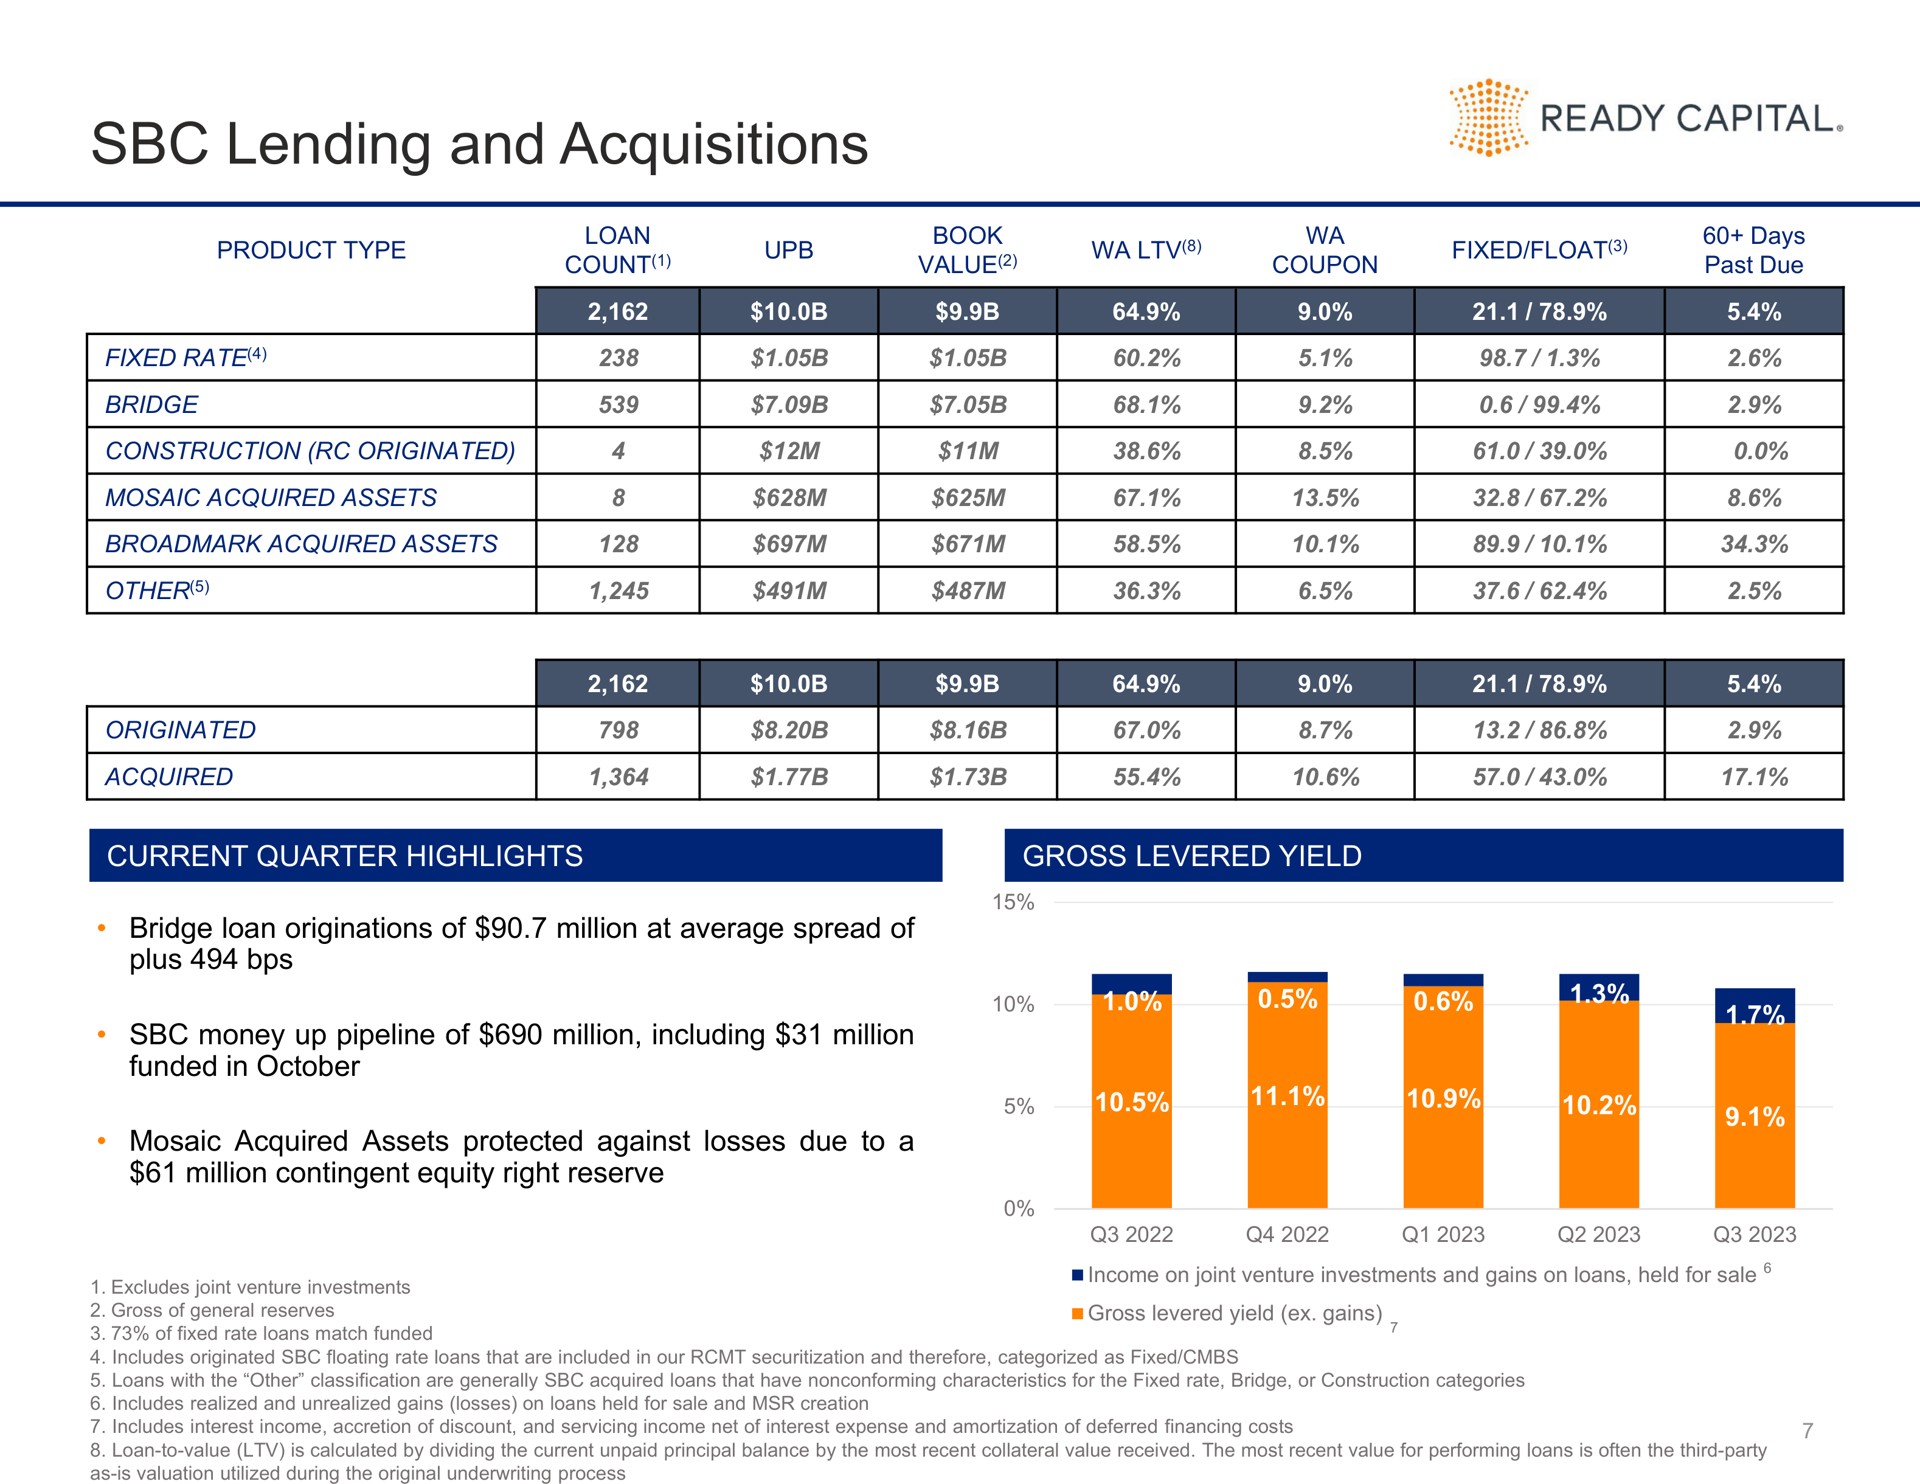 lending and acquisitions ready capital a | Ready Capital